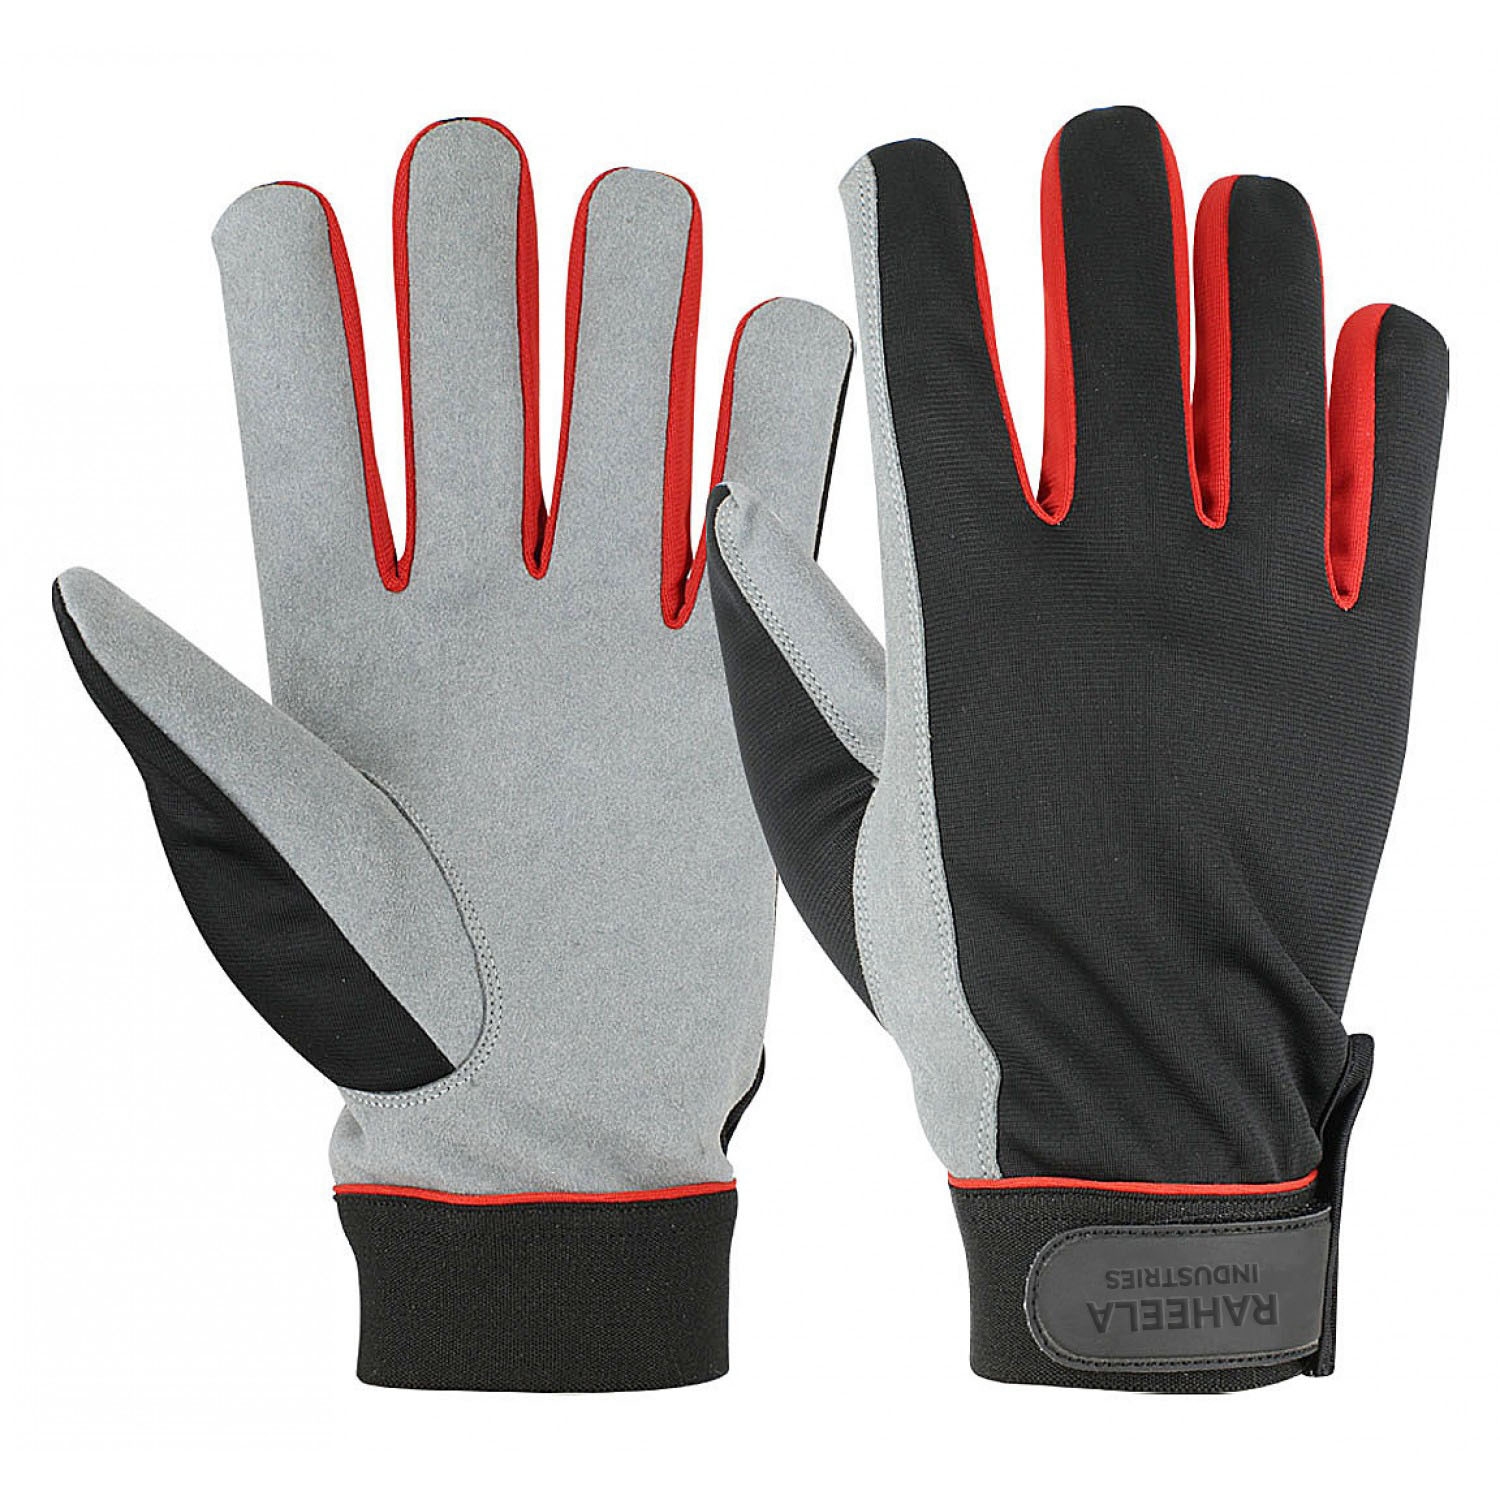 Synthetic Leather Gloves